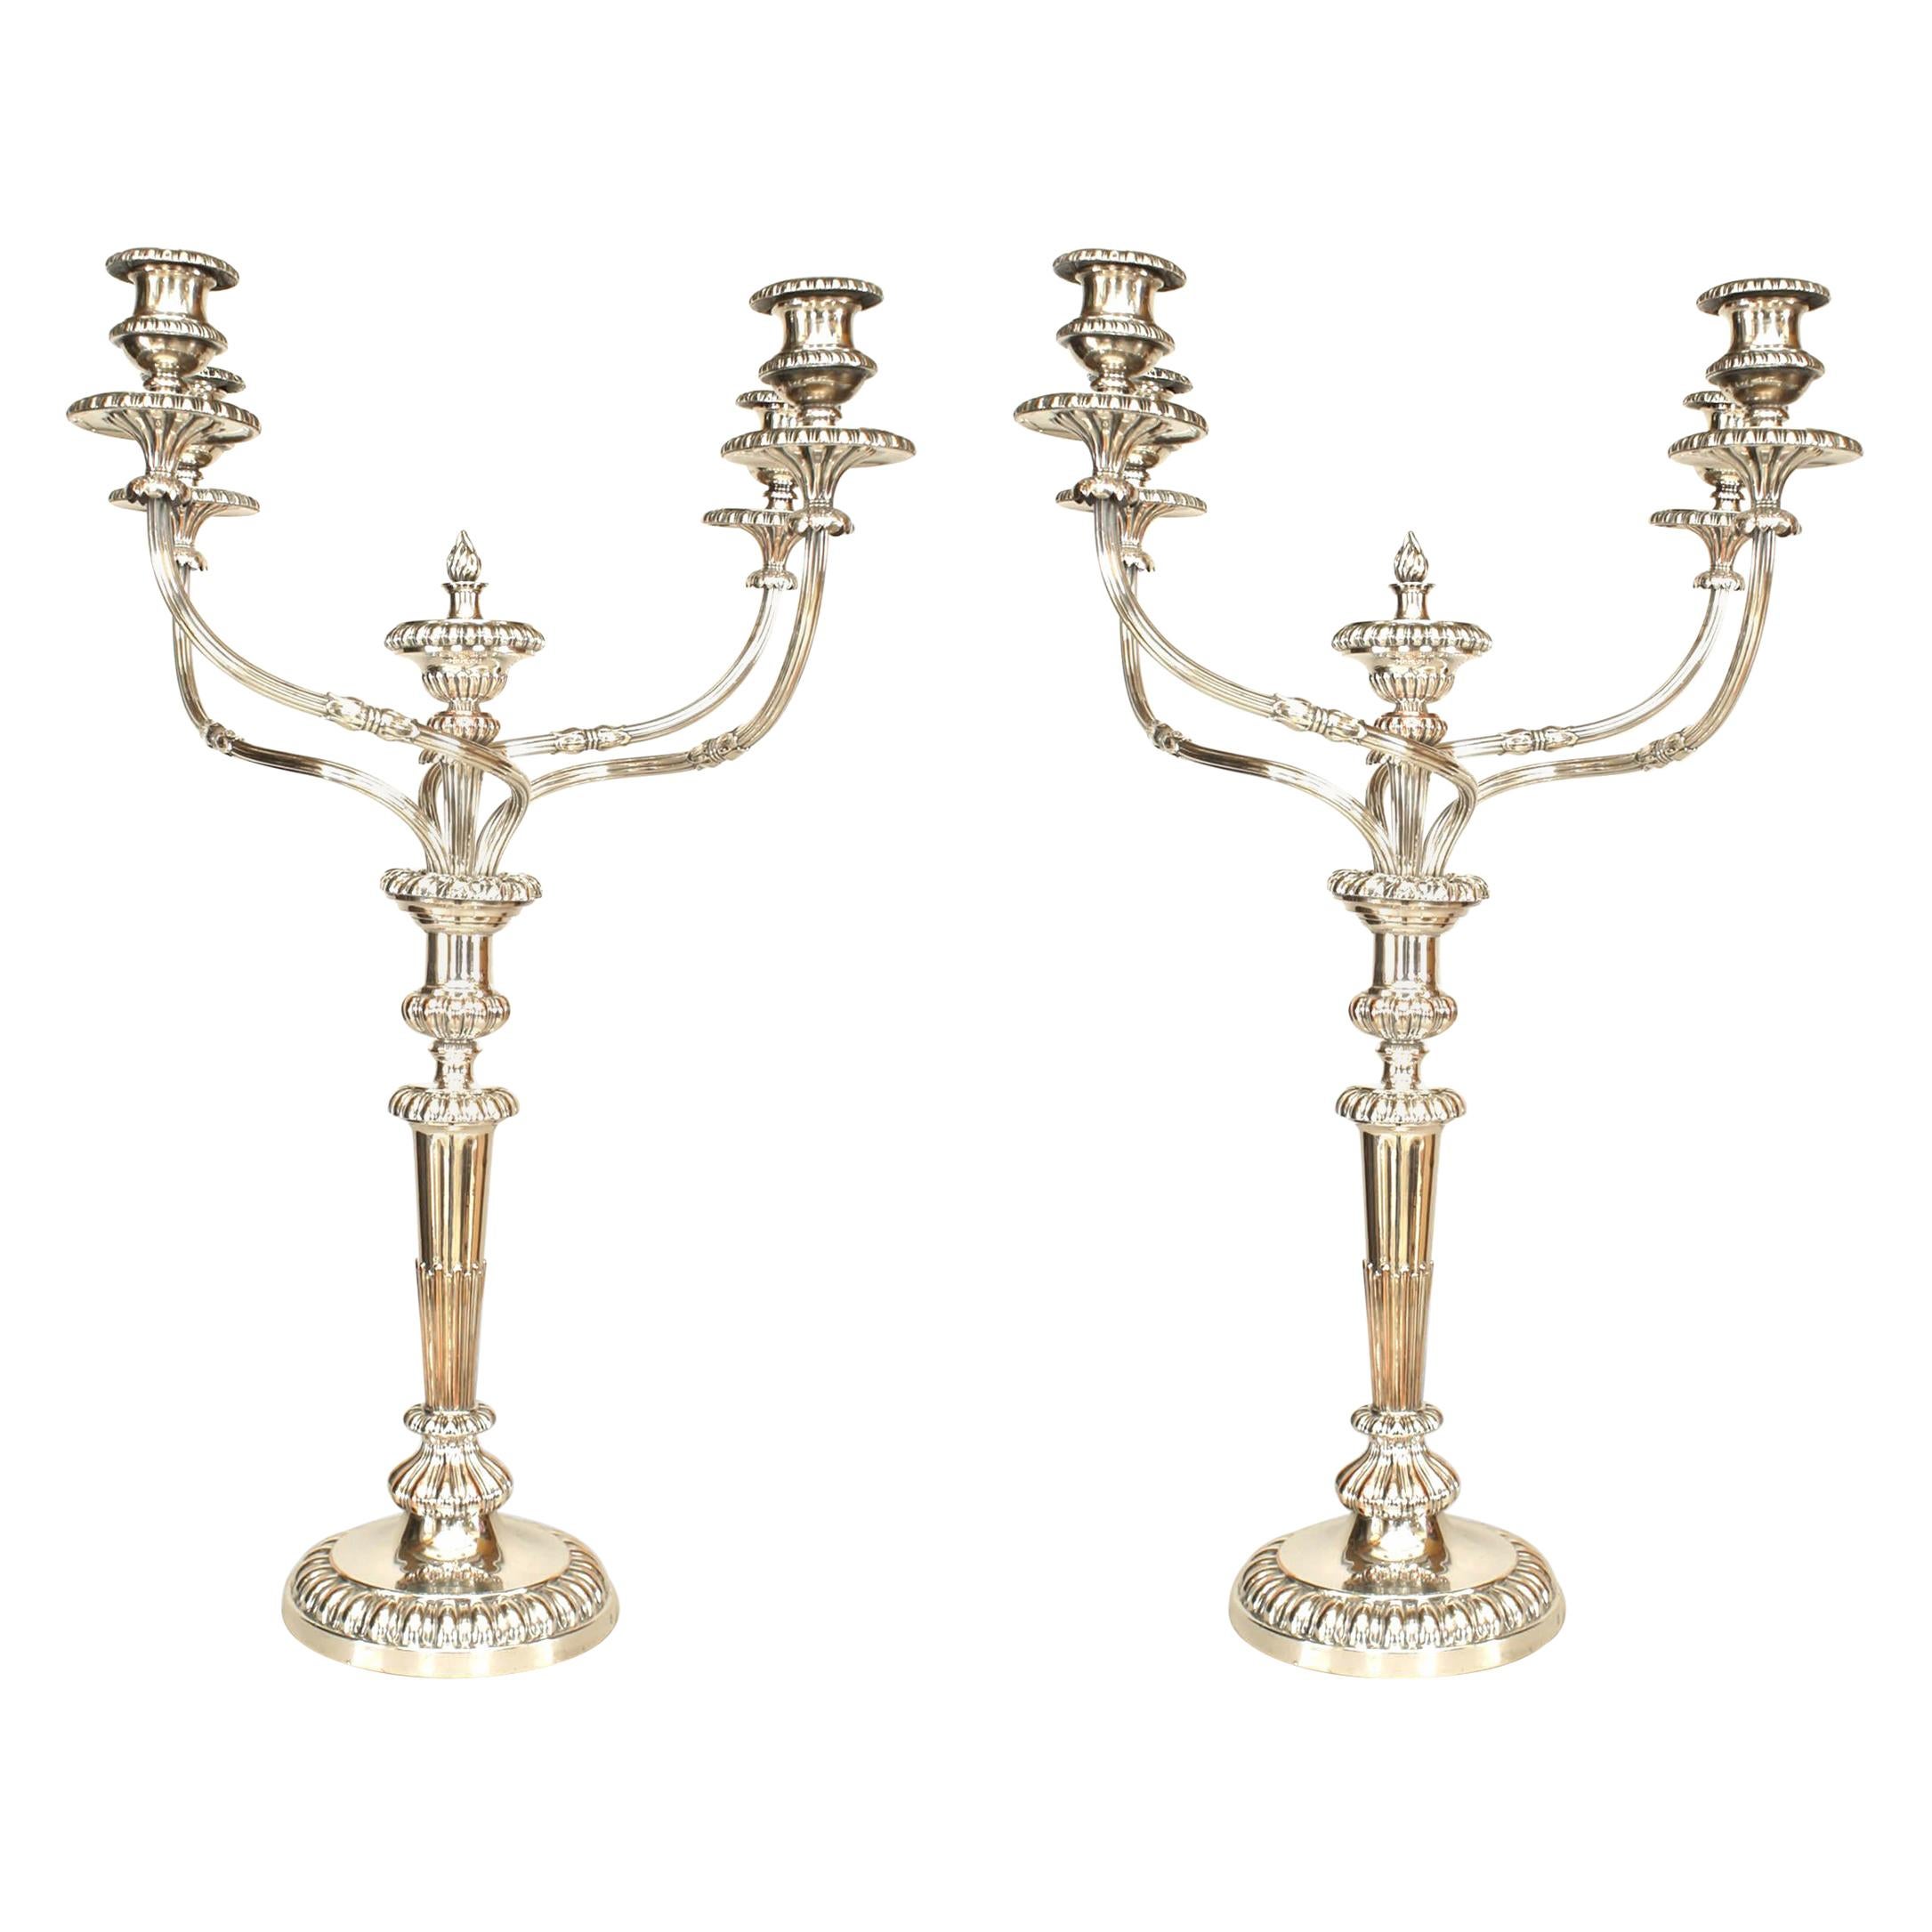 Pair of English Georgian Silver Plated Candelabras For Sale